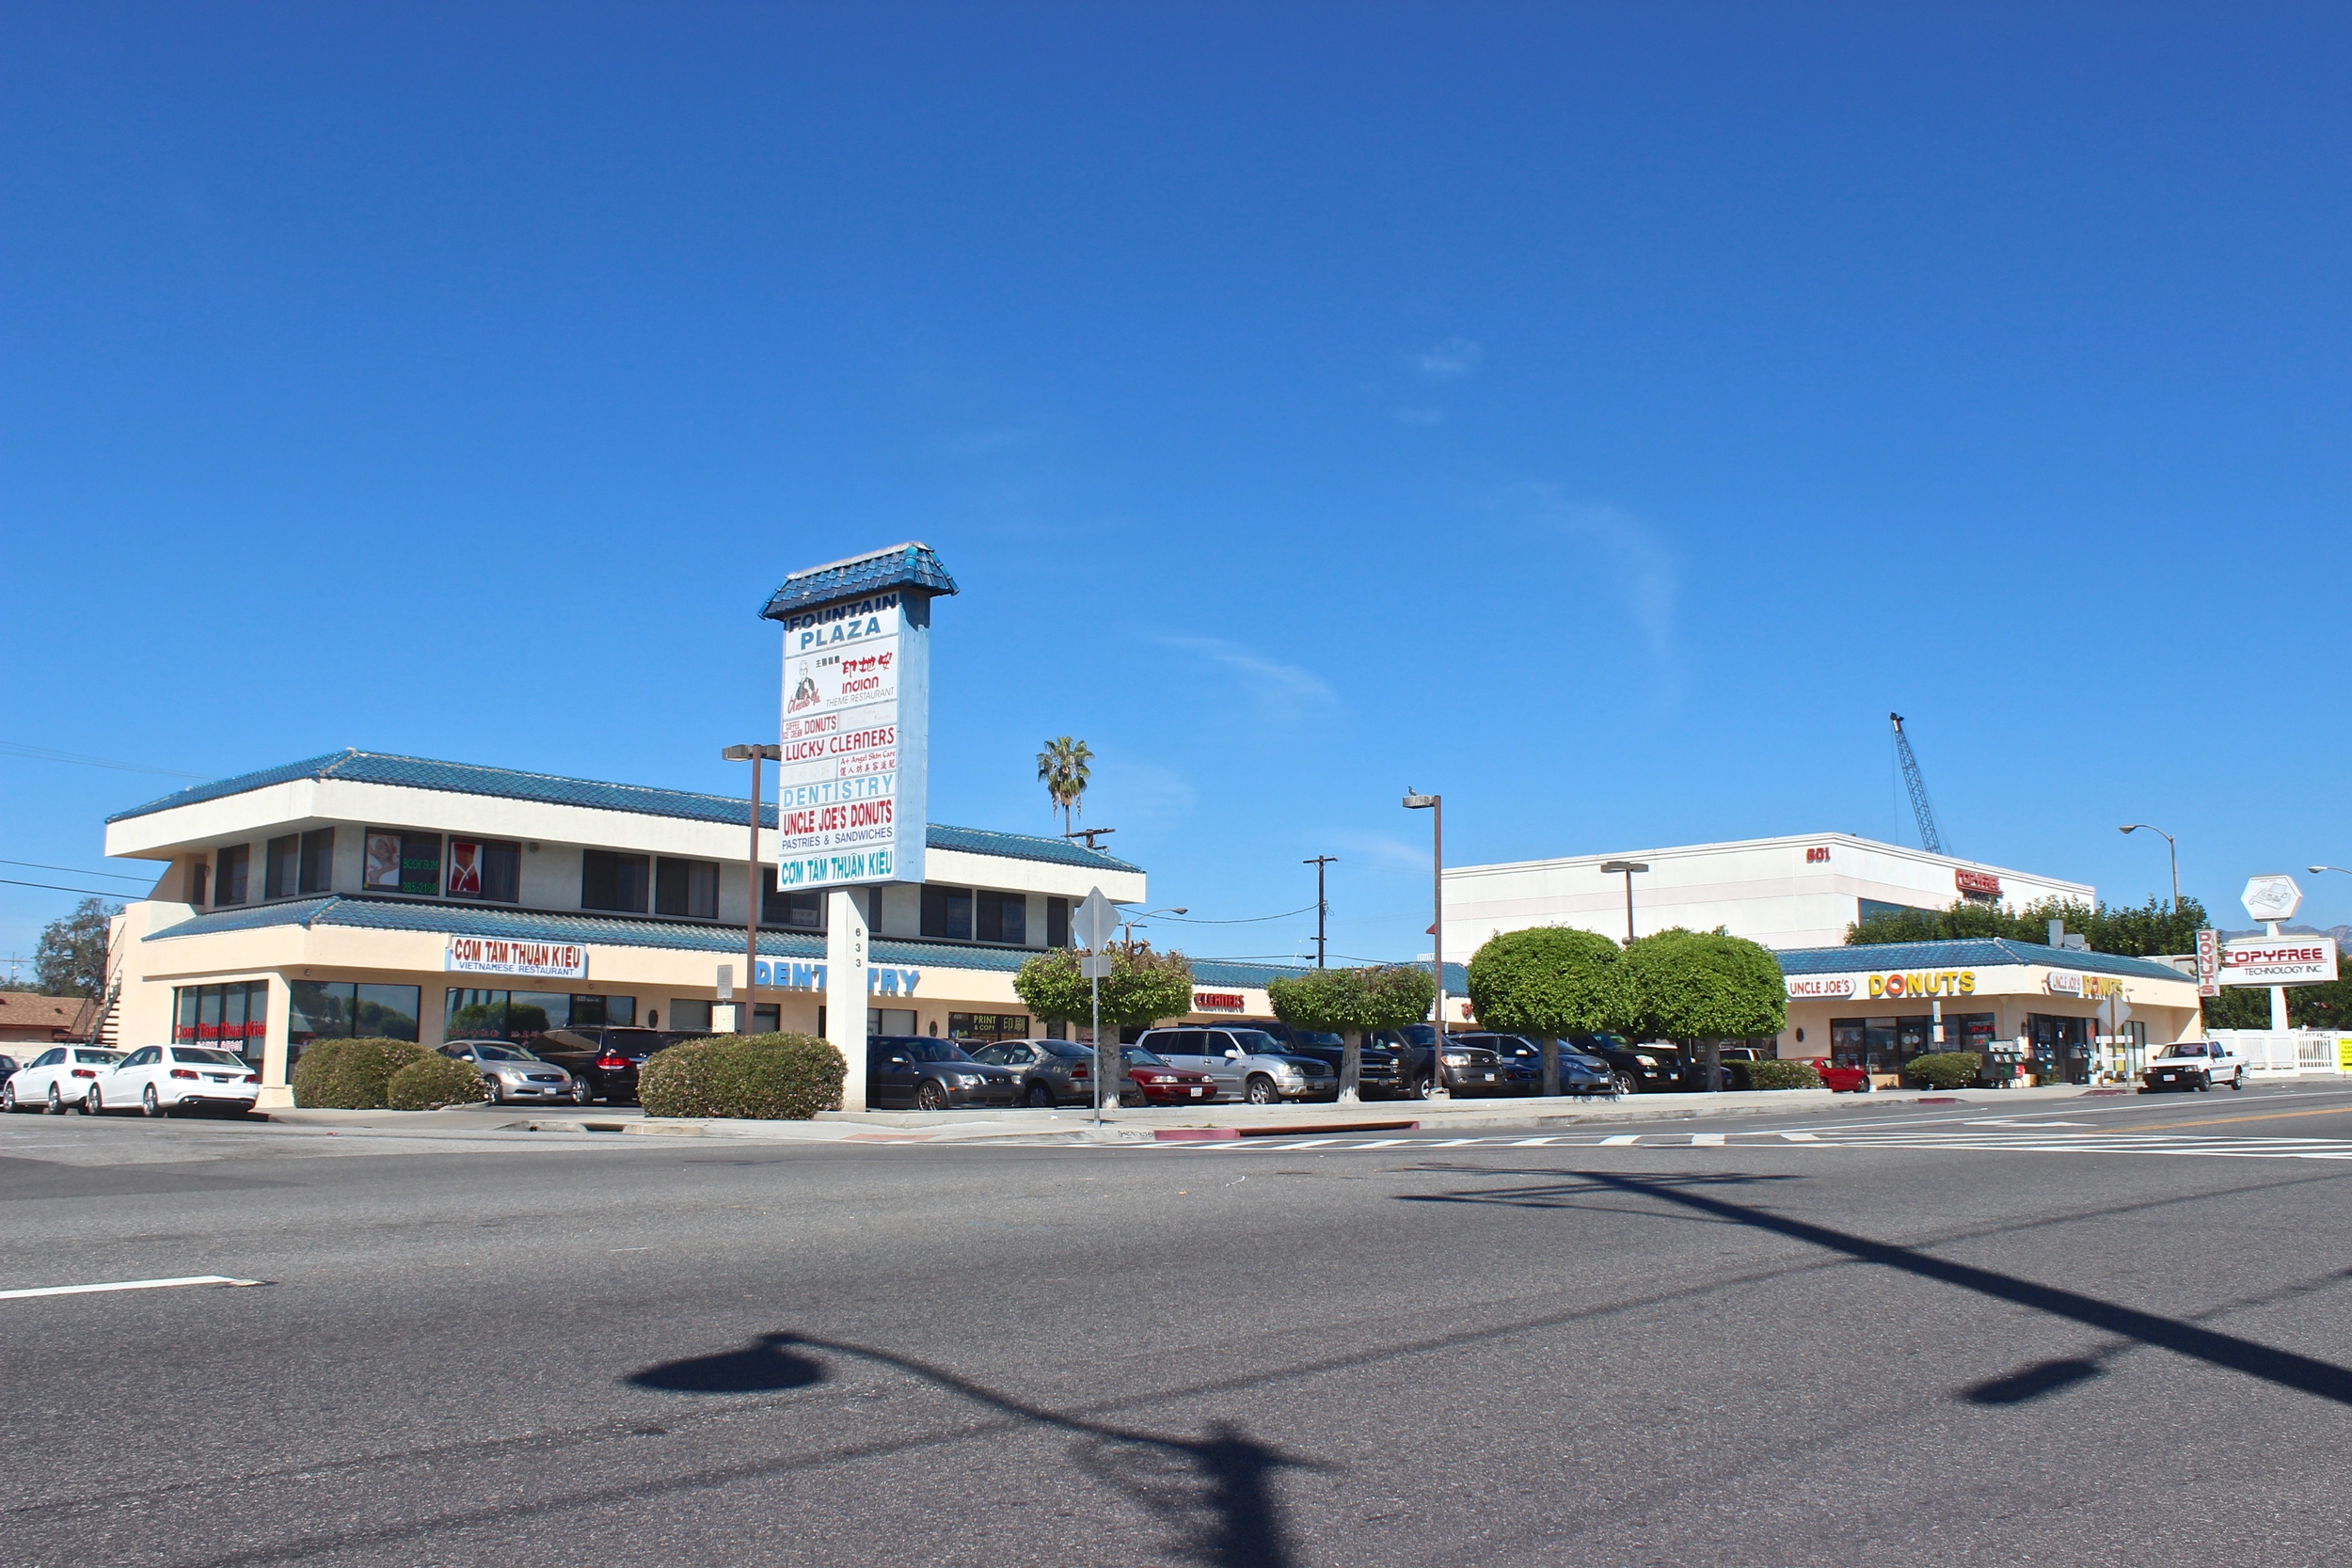  Street view of two story shopping center with multiple store fronts. 